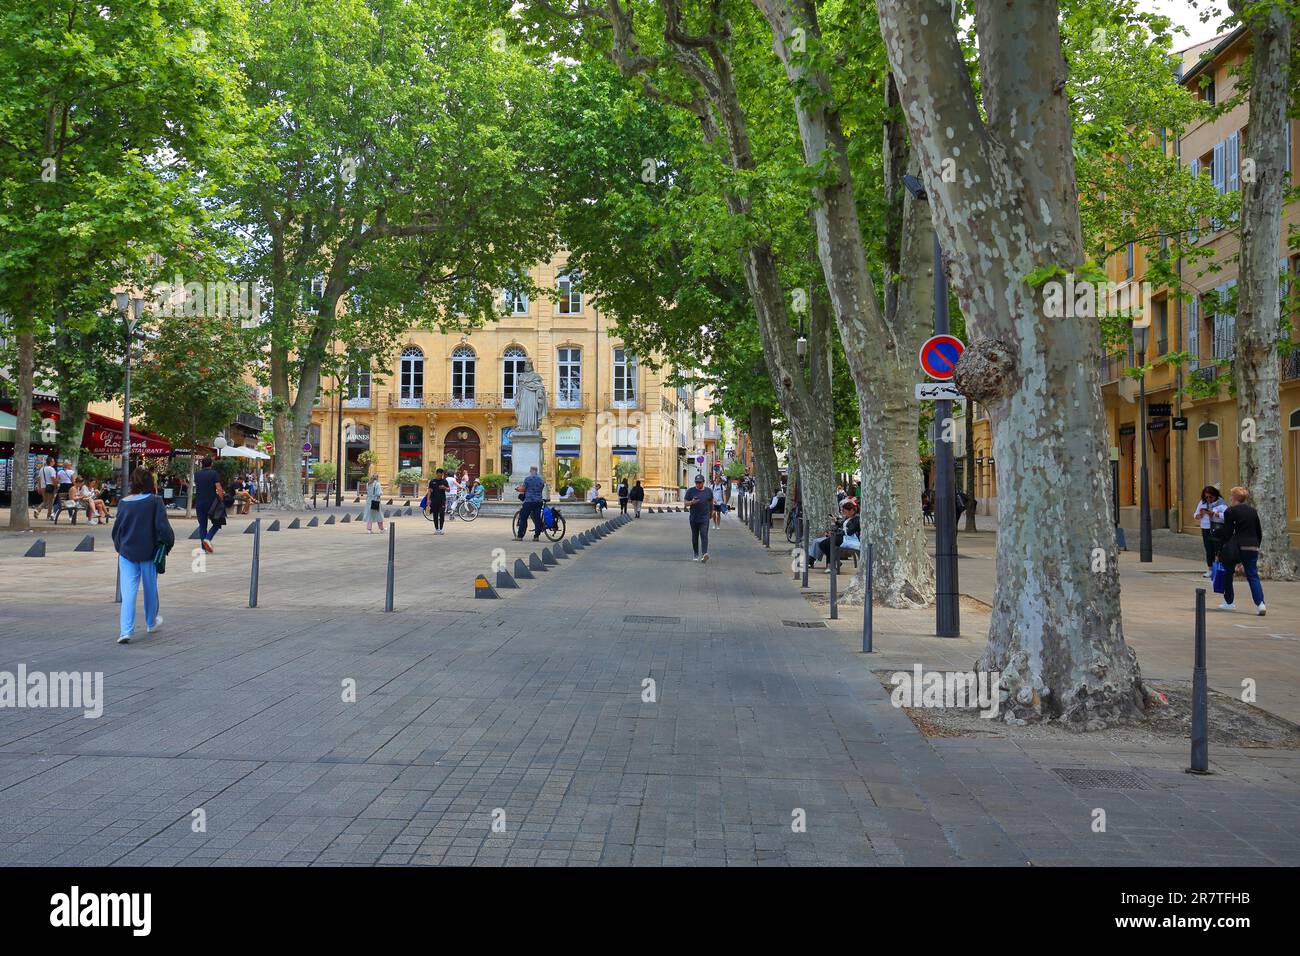 Famous Cours Mirabeau Boulevard with avenue and for strolling, pedestrian, street, Aix-en-Provence, Bouches-du-Rhone, Provence, France Stock Photo